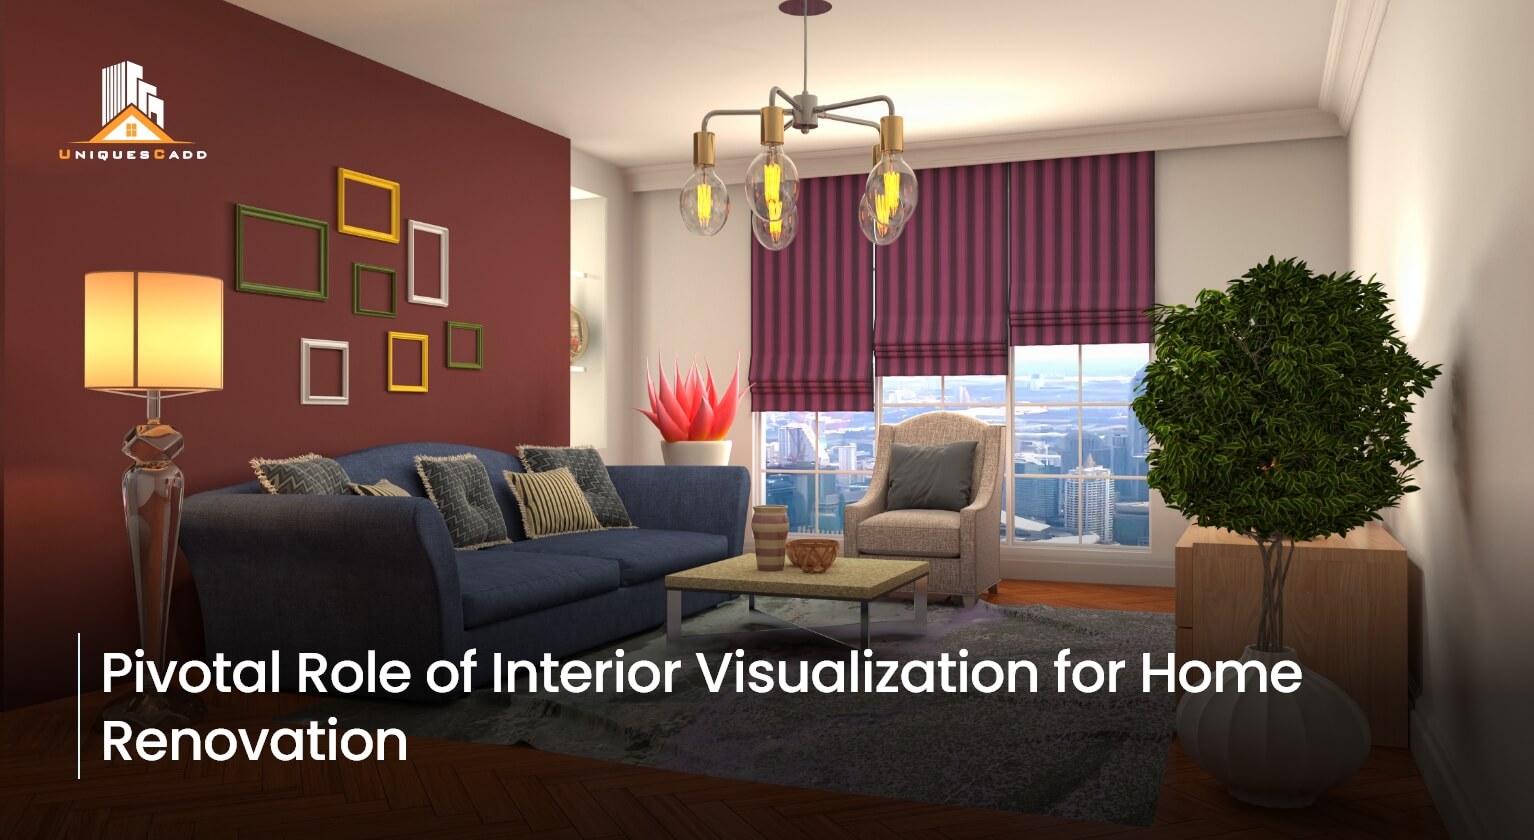 Pivotal Role of Interior Visualization for Home Renovation